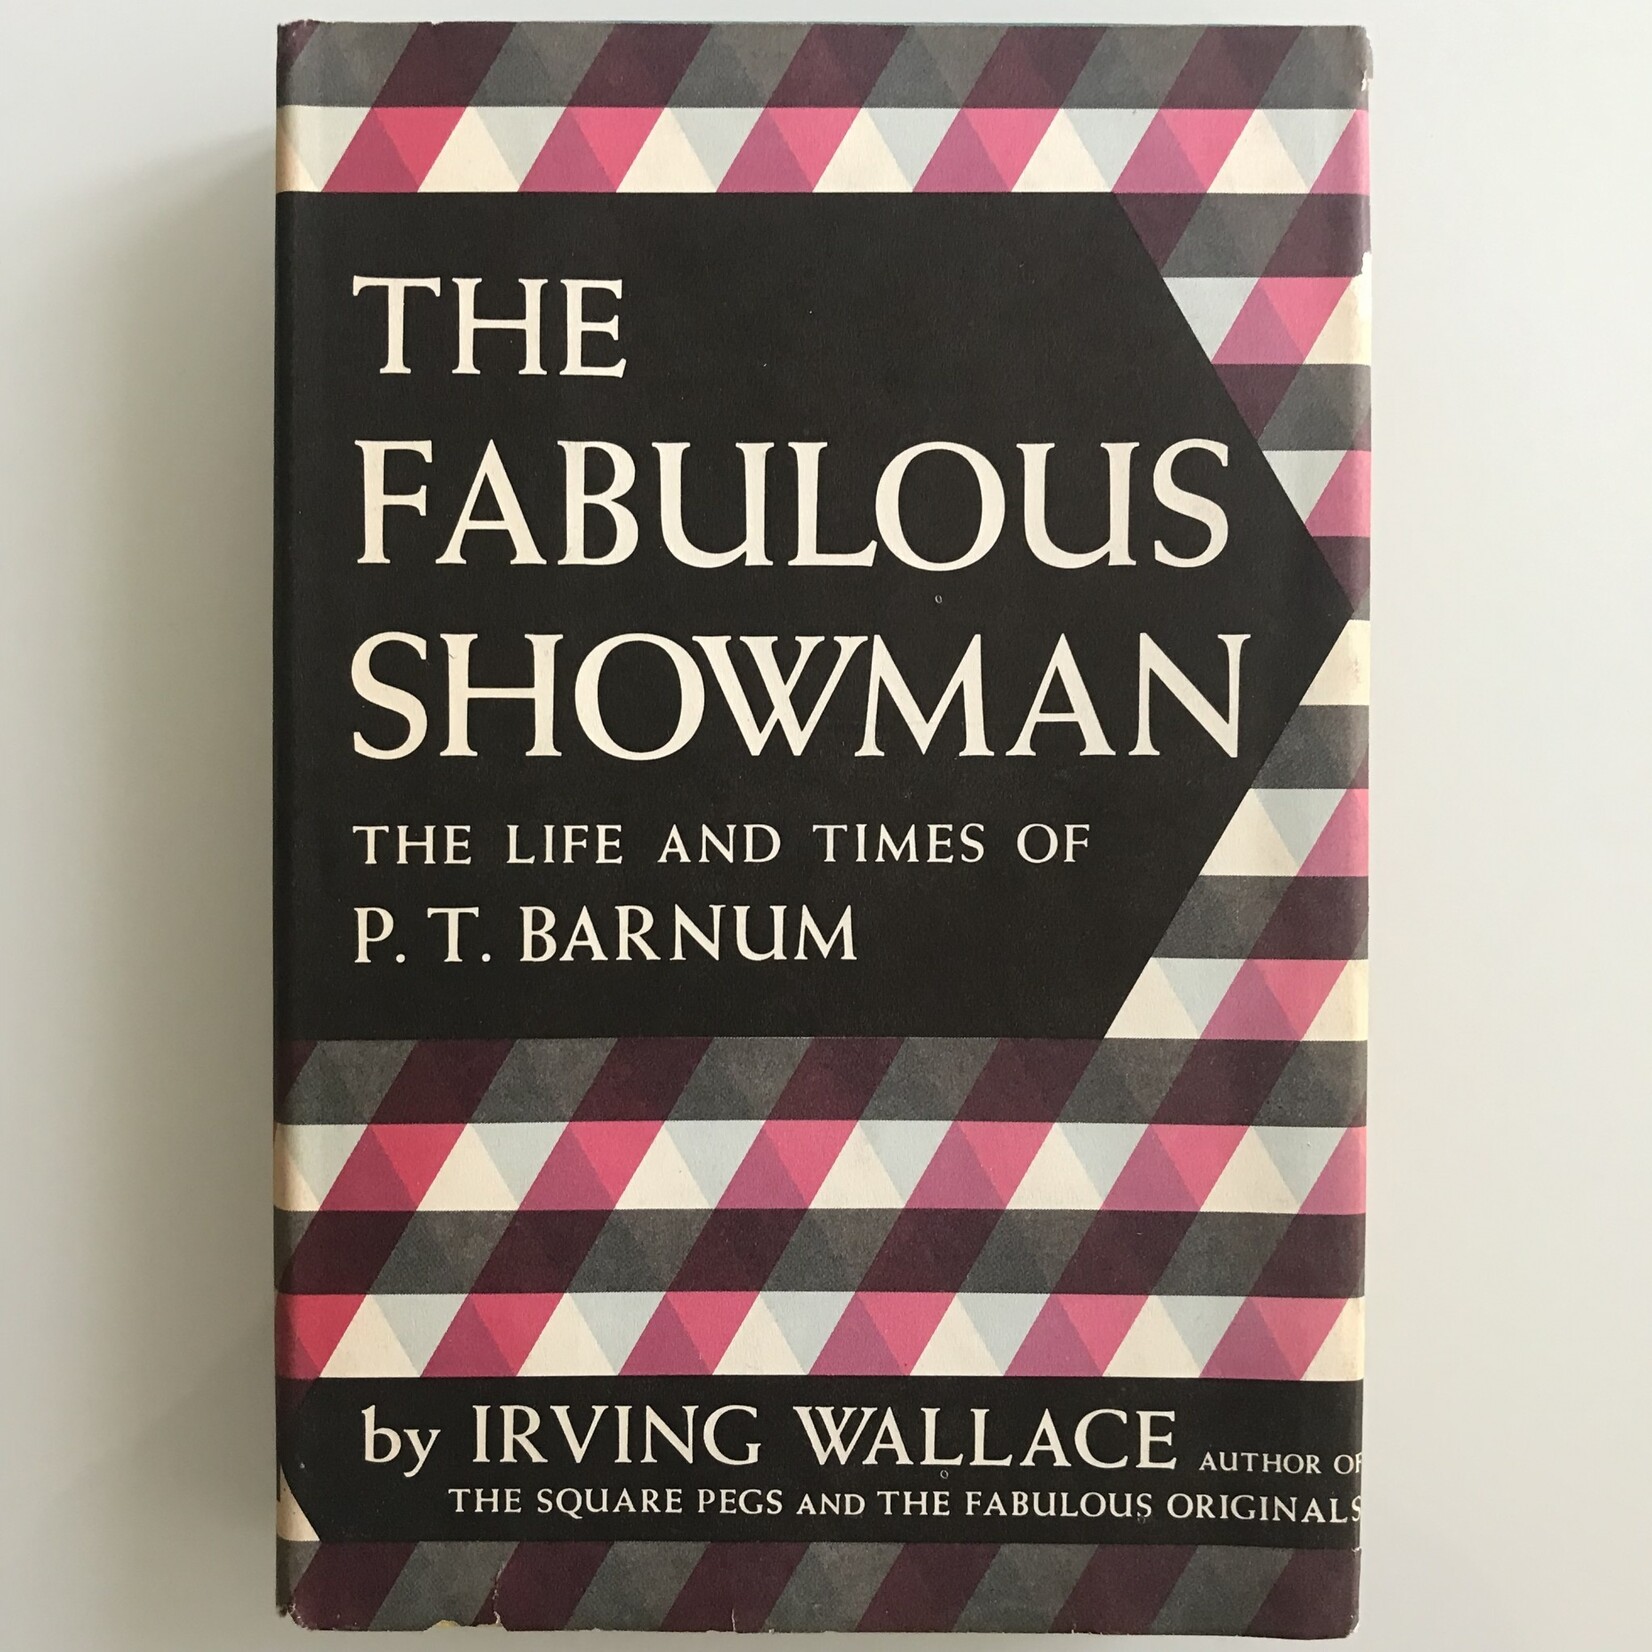 The Fabulous Showman: The Life And Tomes Of P.T. Barnum